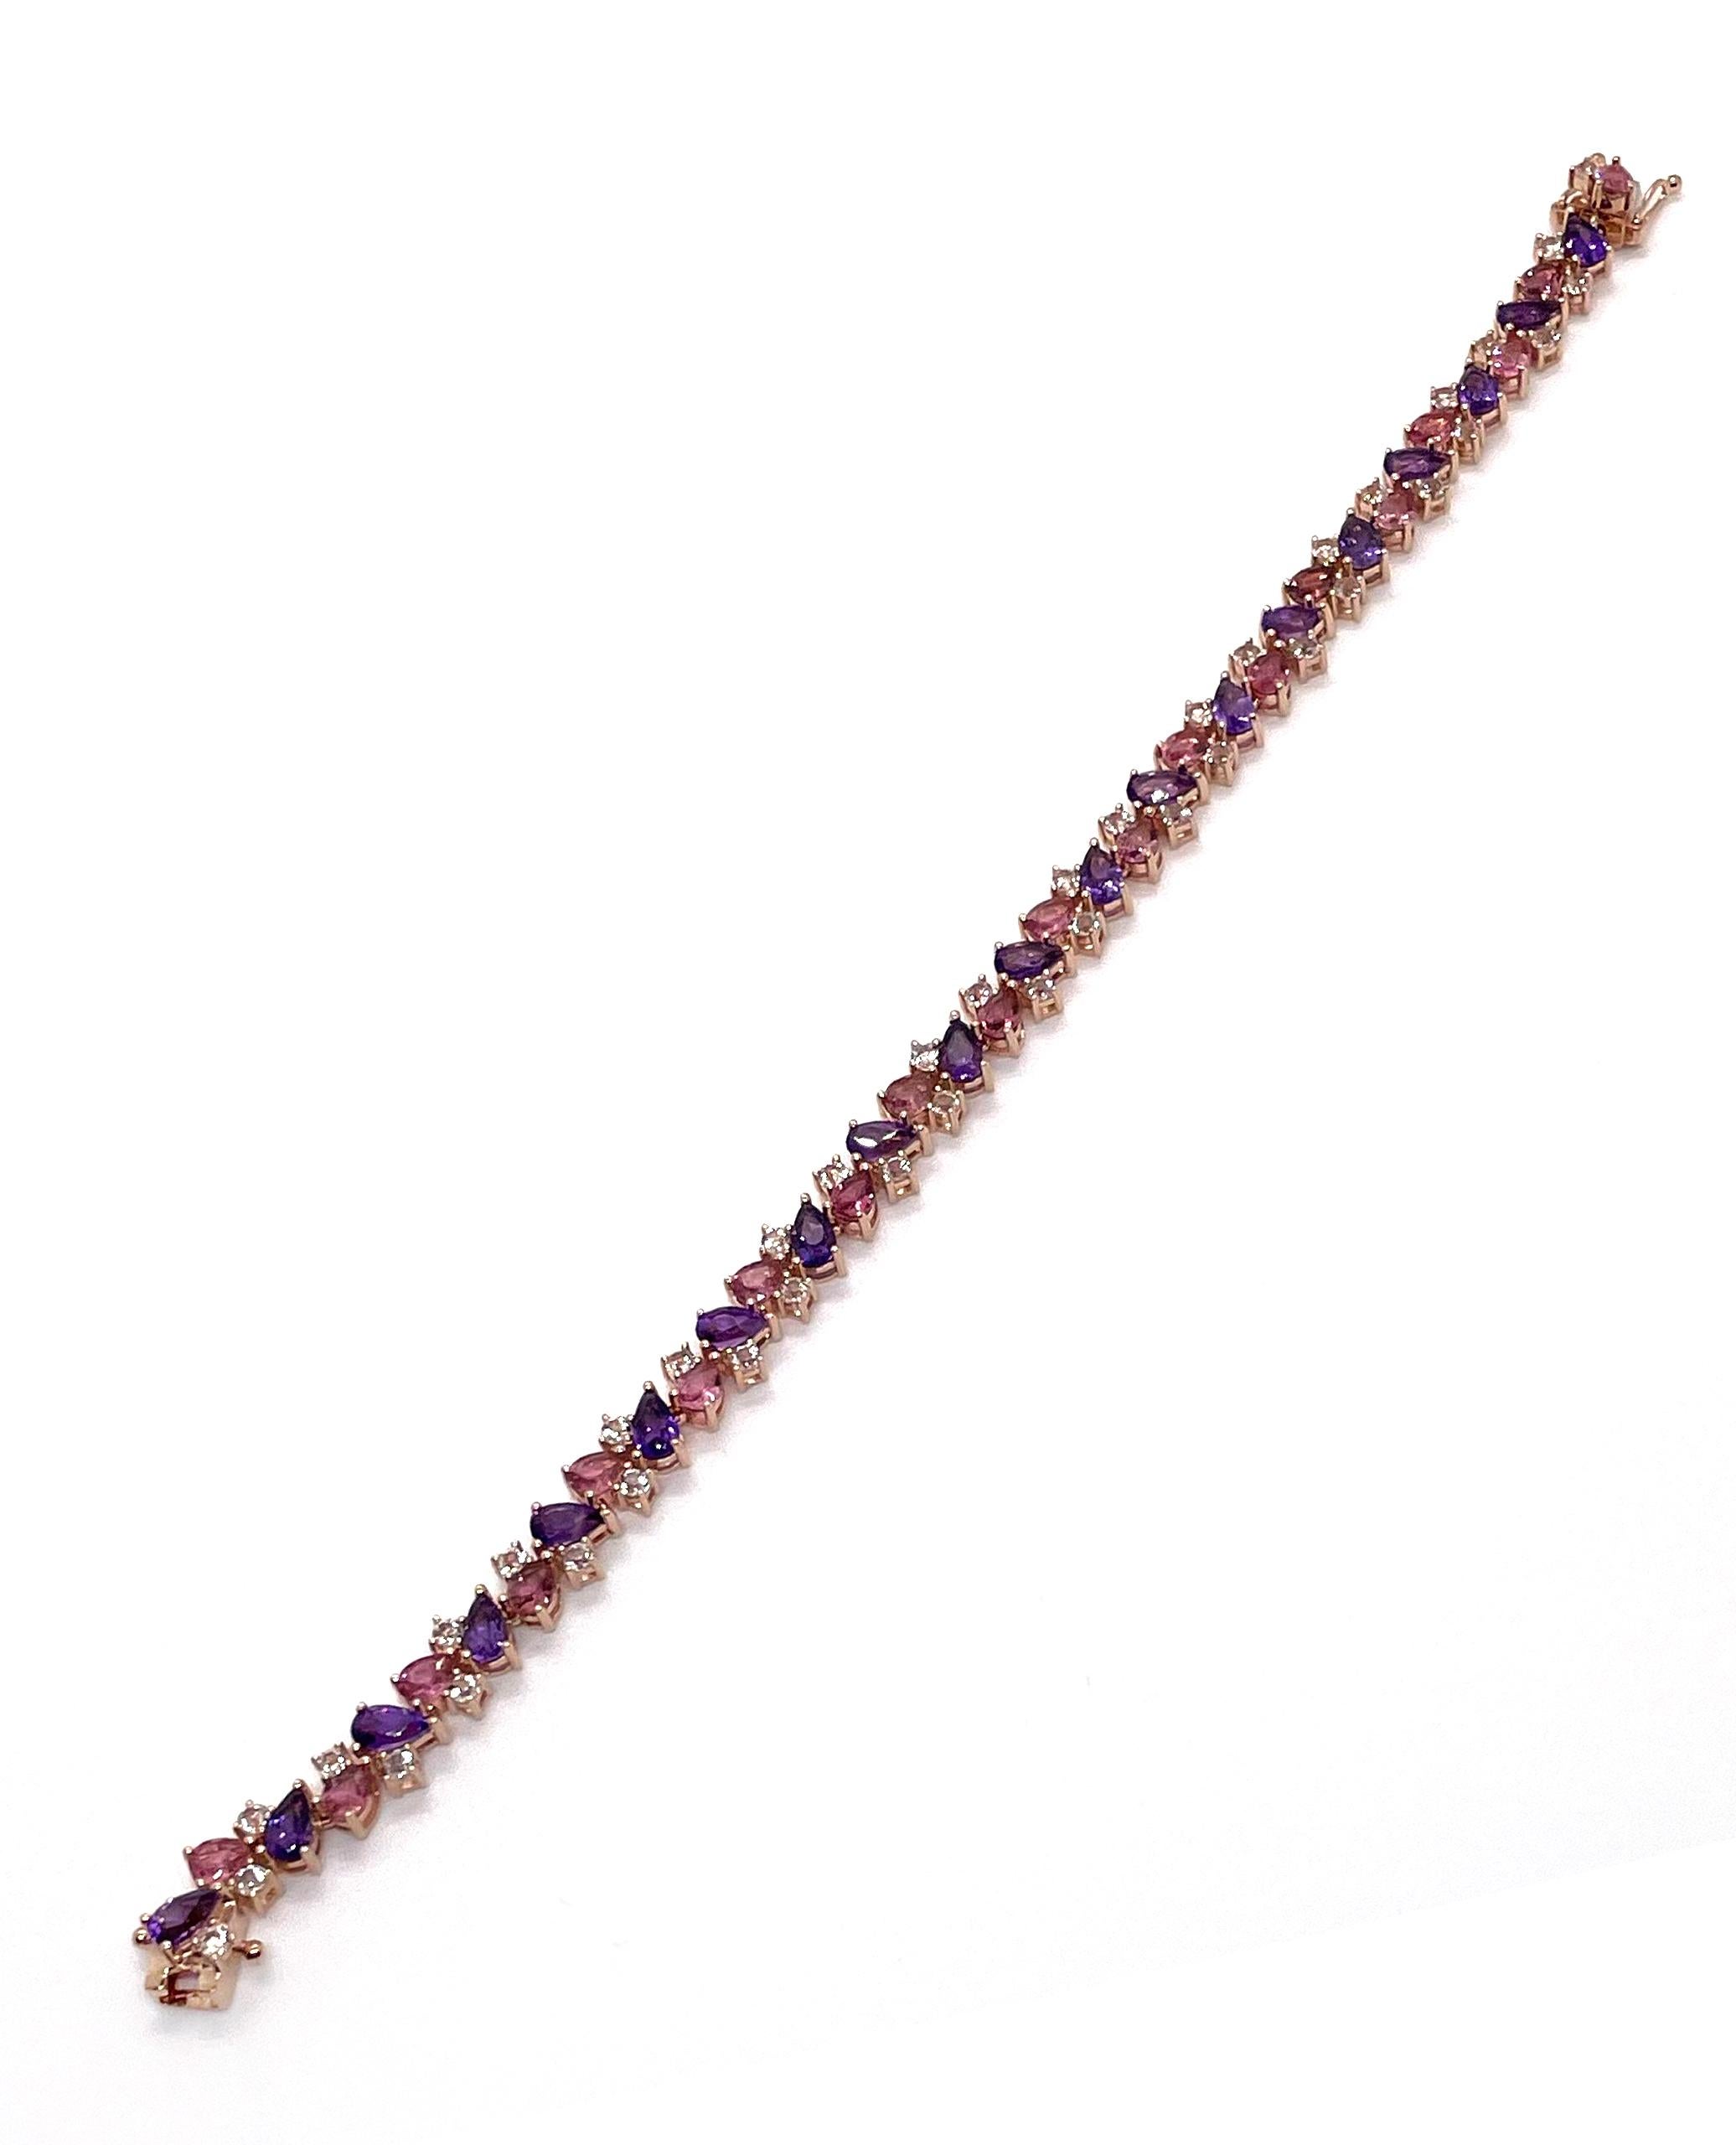 Beautifully composed 14K rose gold bracelet with 3.24 carats pear shaped amethyst, 2.49 carats pear shaped pink tourmaline and 1.59 carats round white topaz. 

* 7 inches long